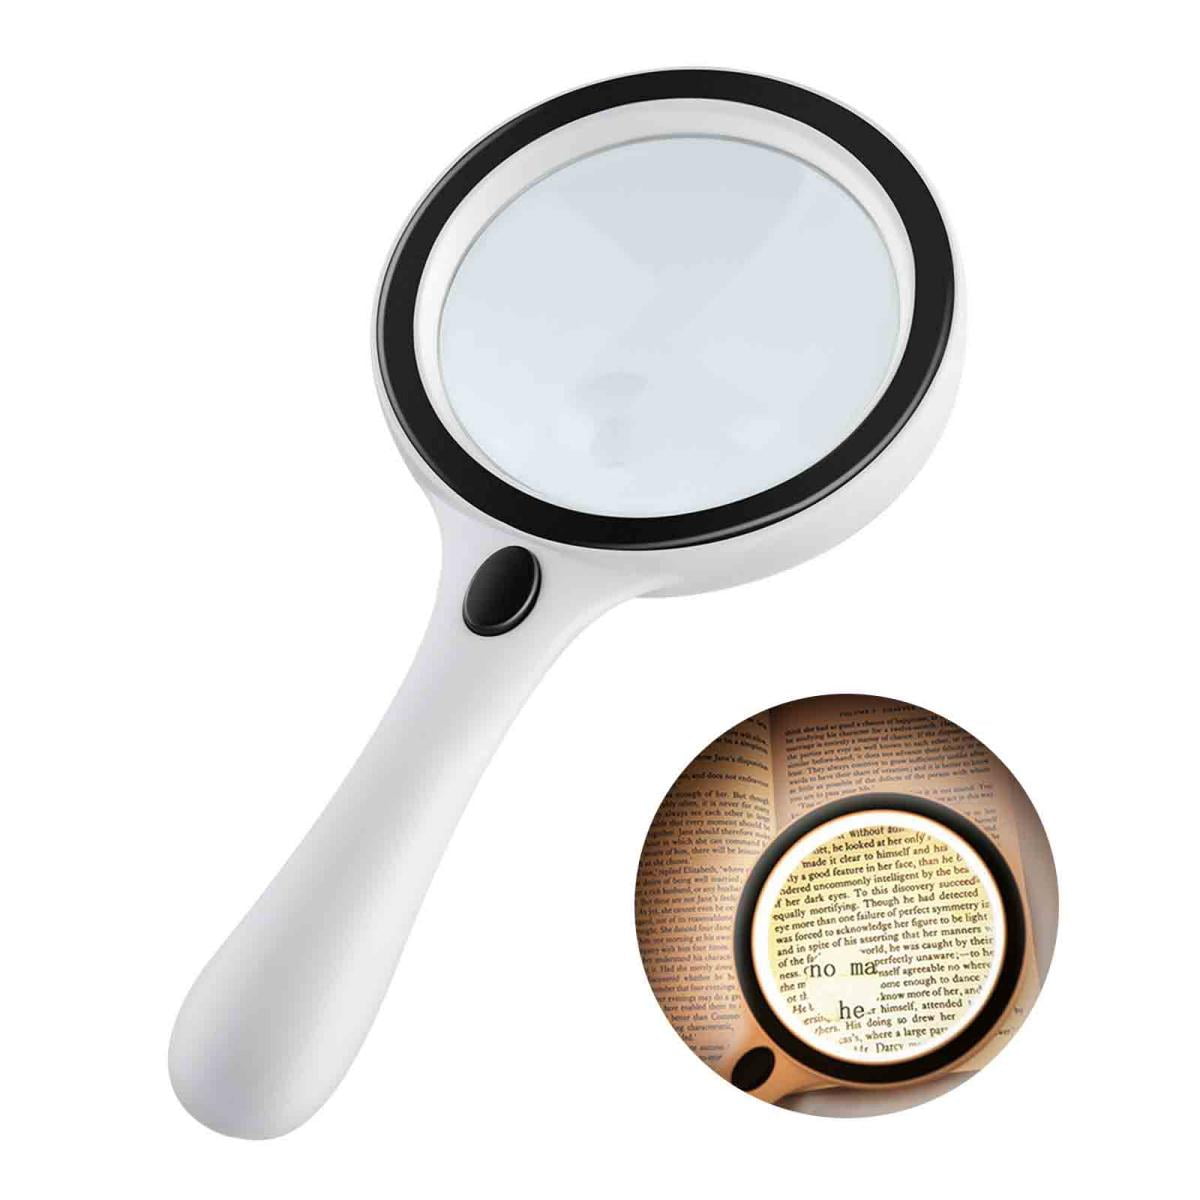 Cencita Magnifying Glass with Light, 30X Handheld Magnifying Glass, 12 LED Illuminated Lighted Magnifier for Low Vision Seniors Reading, Macular